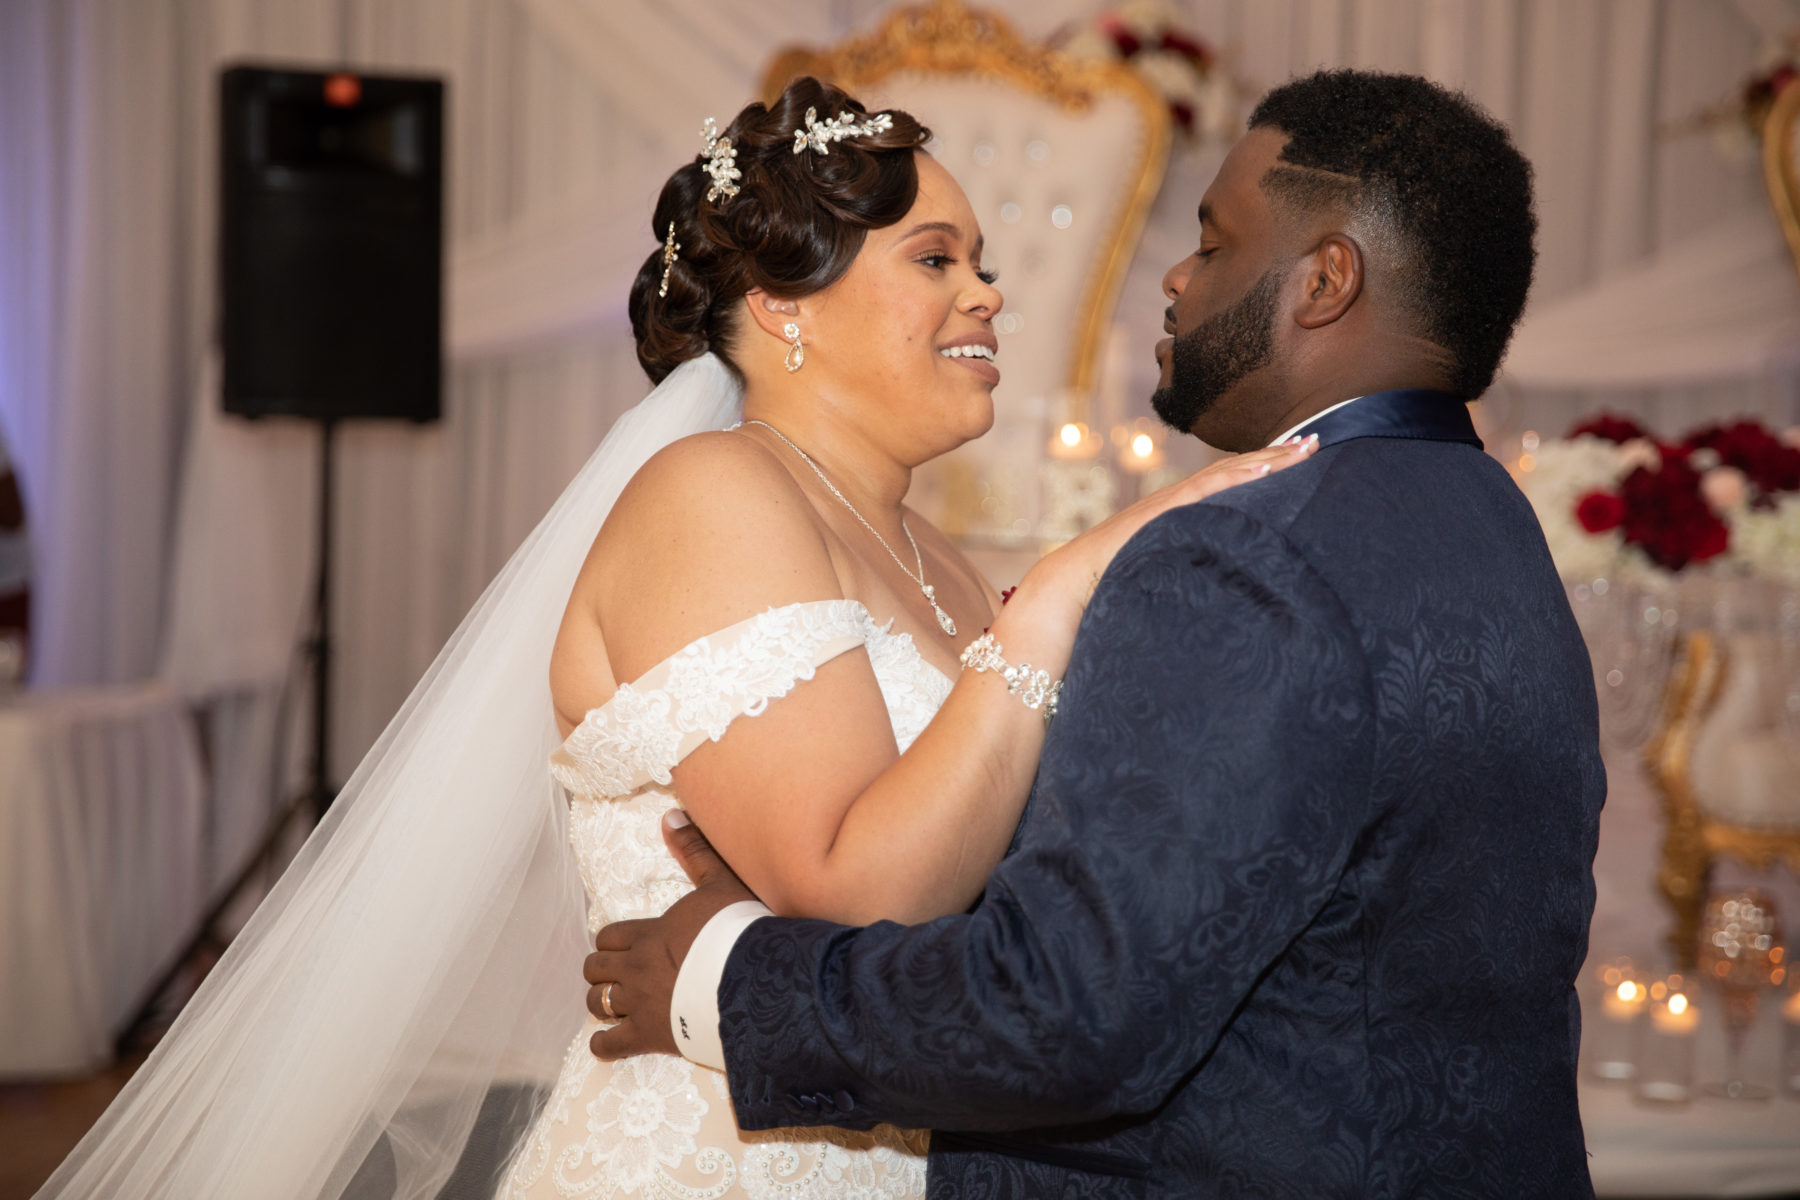 Wedding first dance: Luxurious Stone Rivers Country Club Wedding featured on Nashville Bride Guide